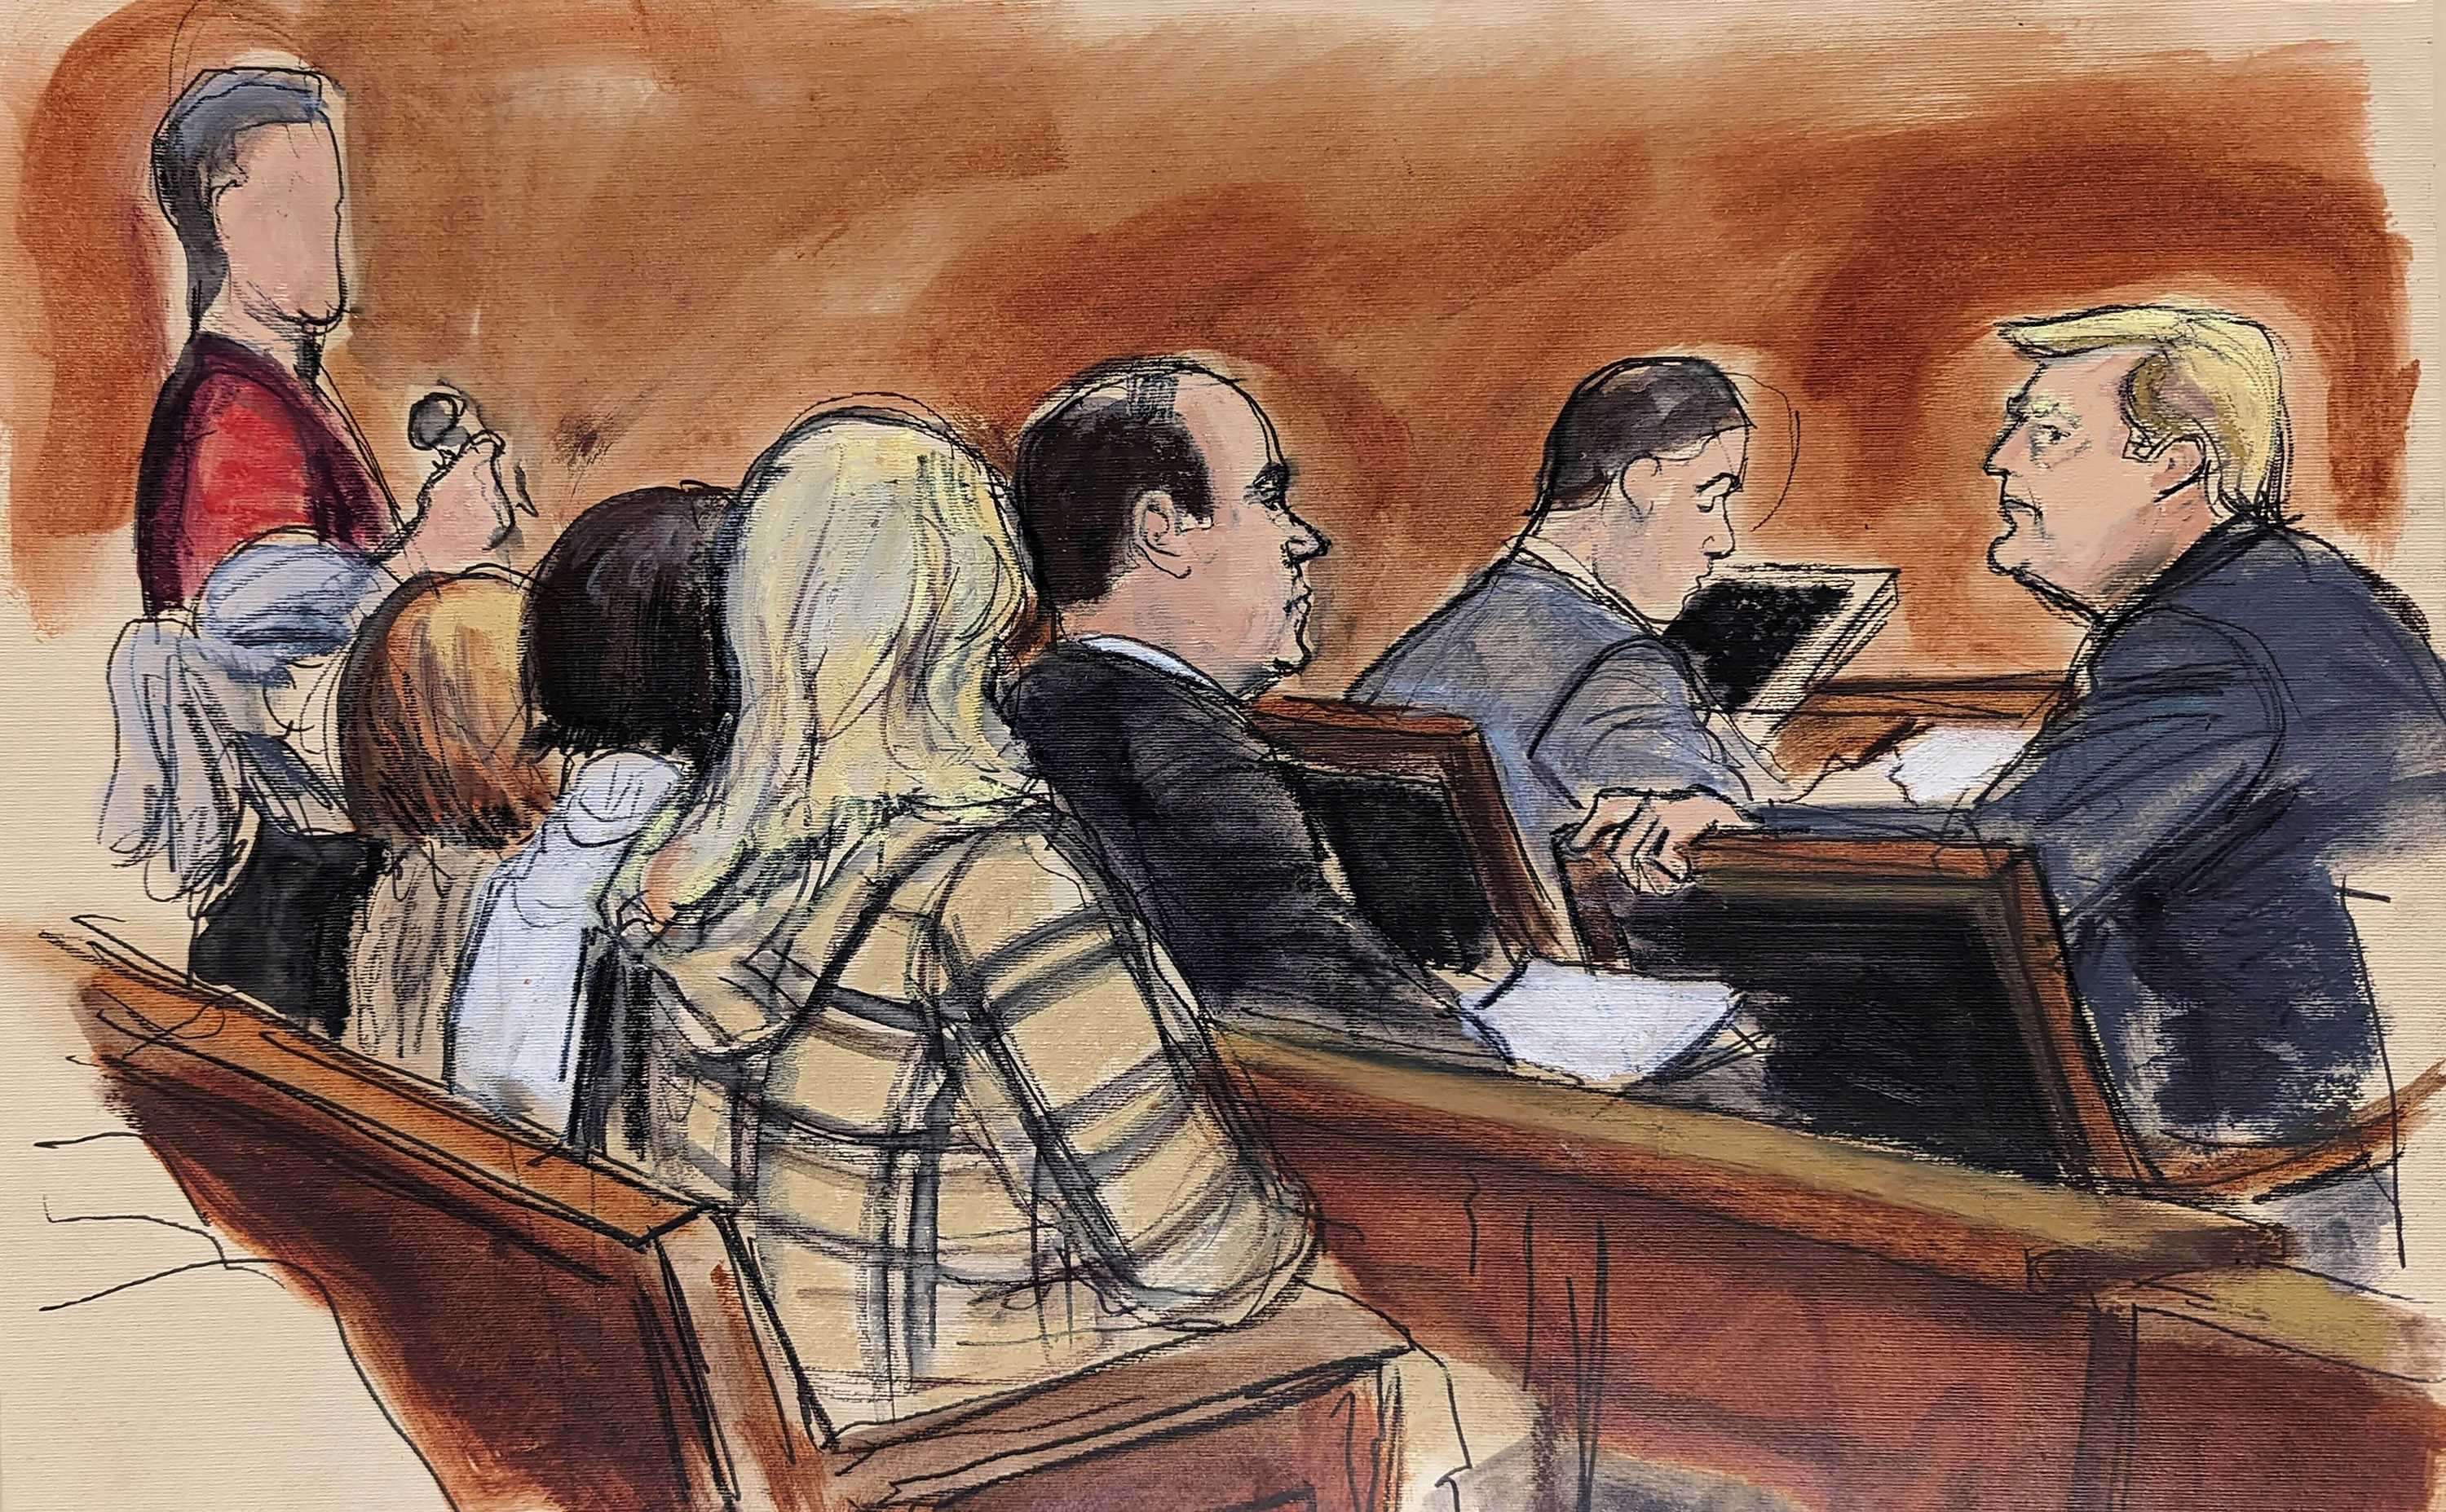 In this courtroom sketch, former President Donald Trump, right, turns to look at a prospective juror, standing left, during questions posed by Judge Lewis Kaplan in the jury selection process in a New York Federal Court on Tuesday.